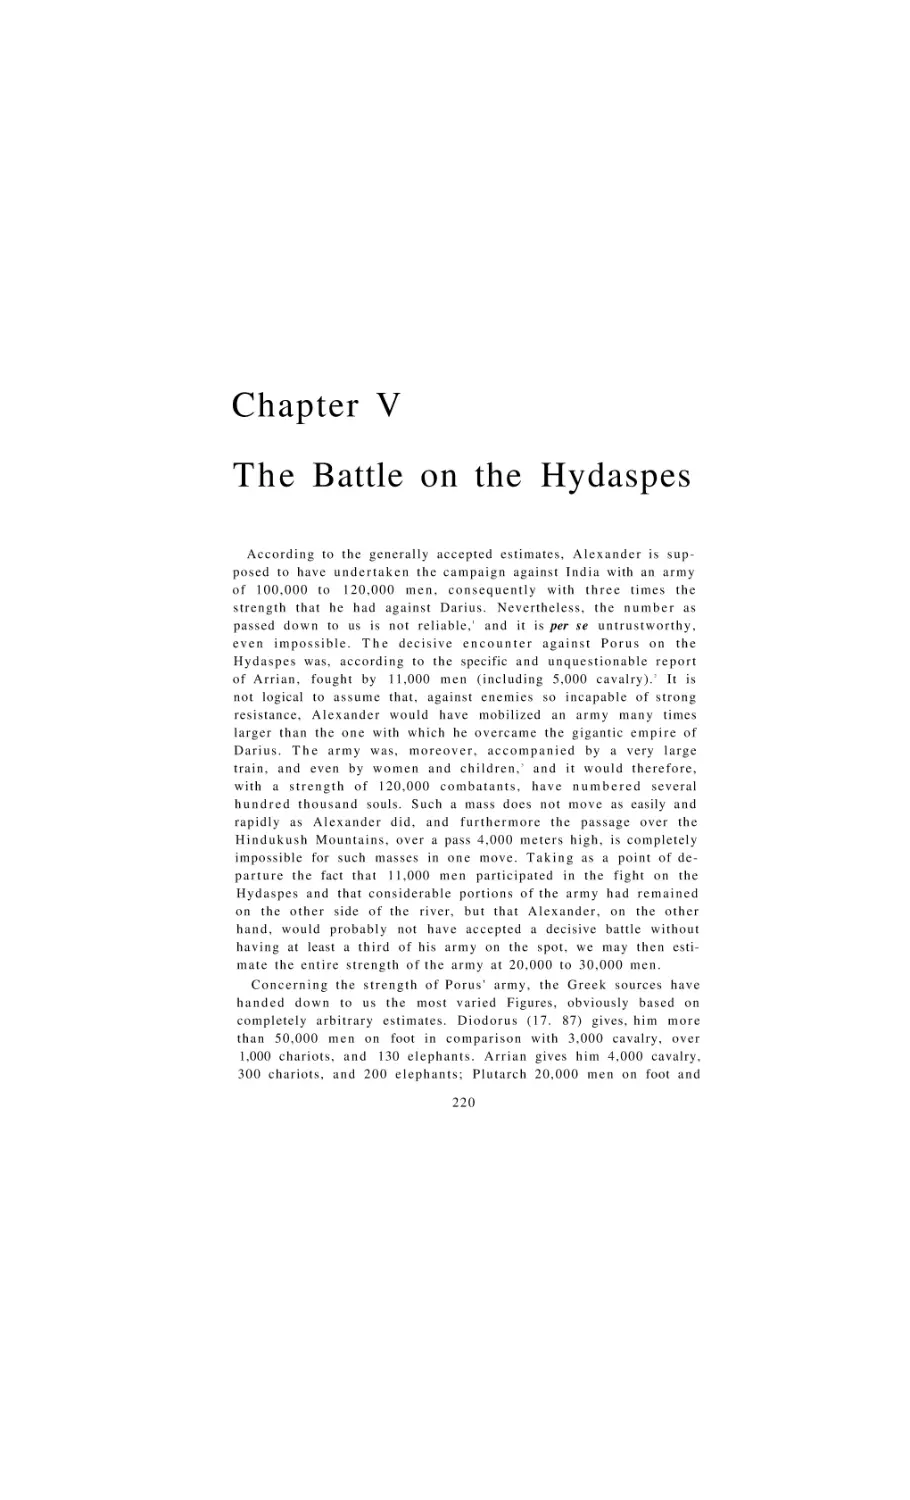 The Battle on the Hydaspes